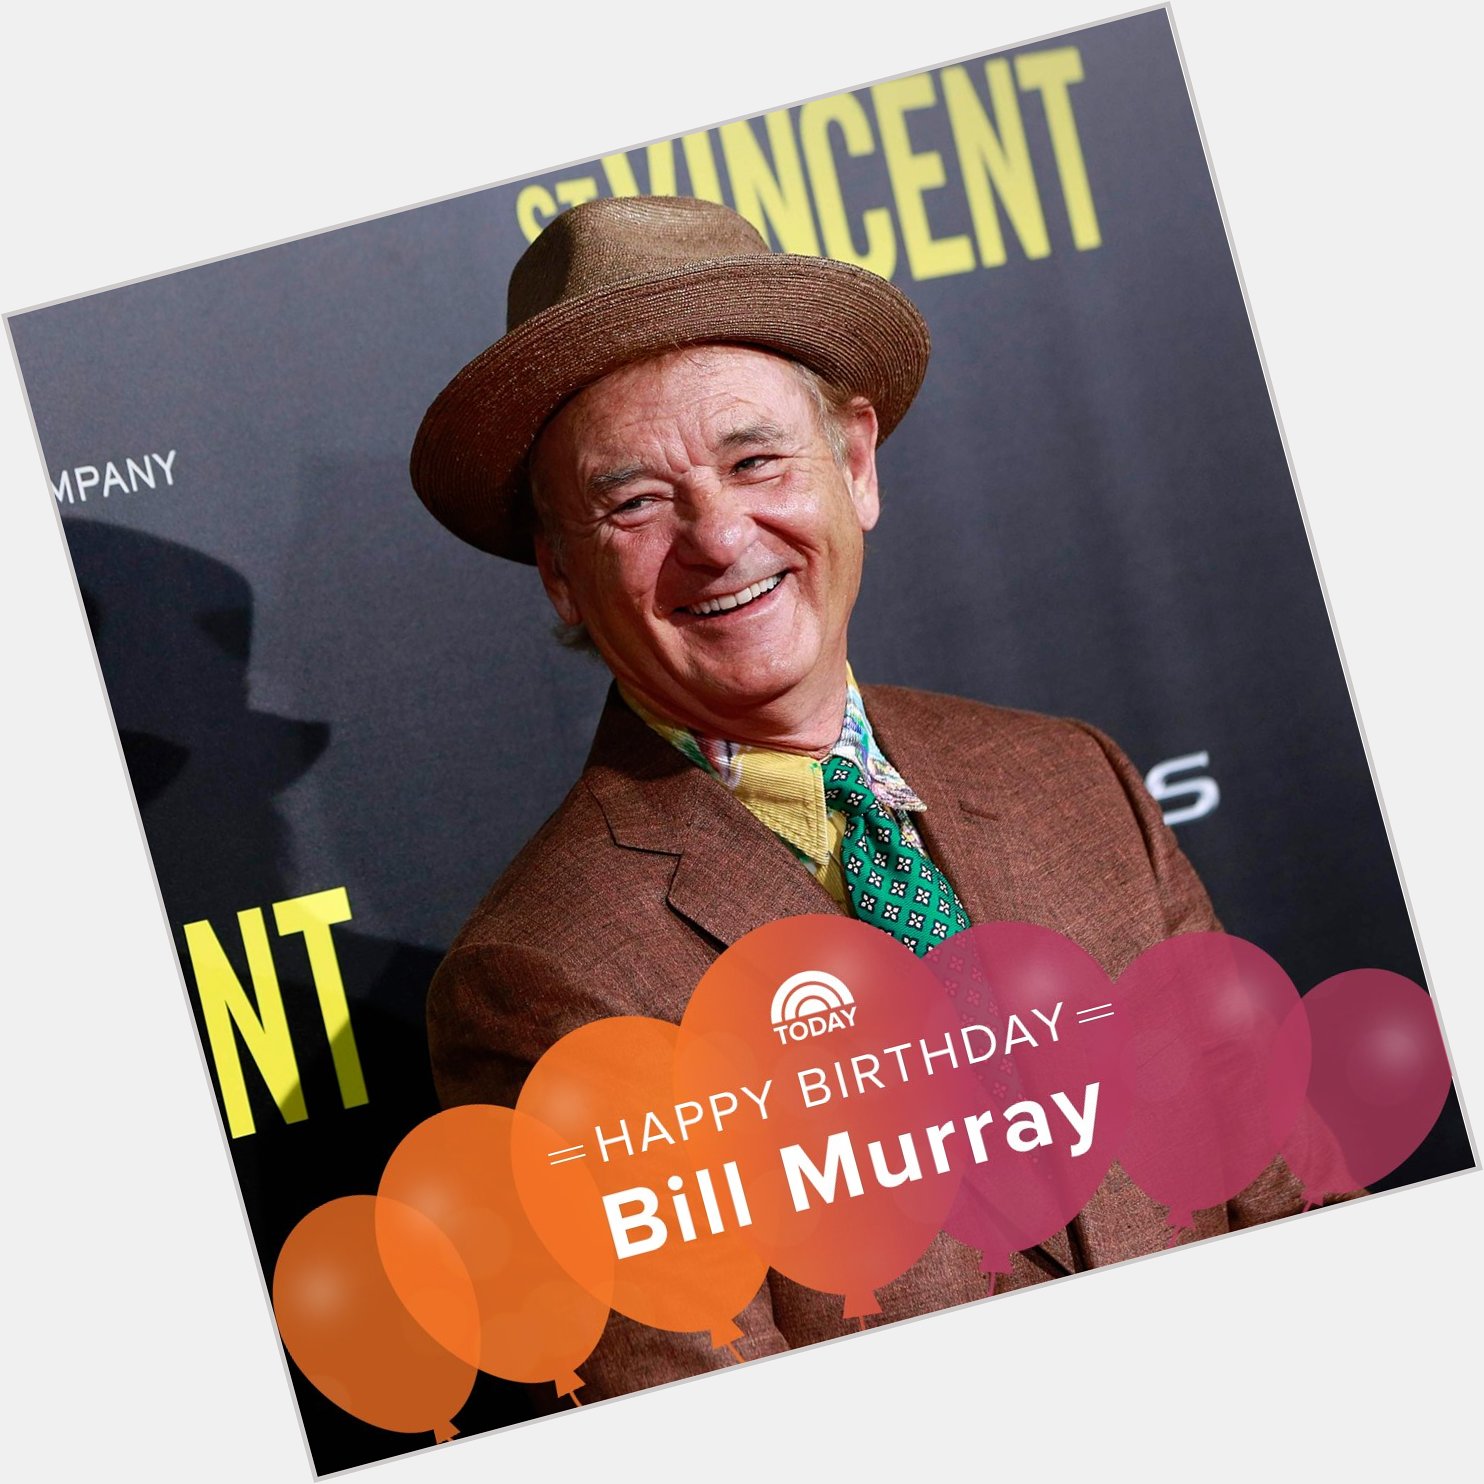 Happy birthday to the talented Bill Murray! 